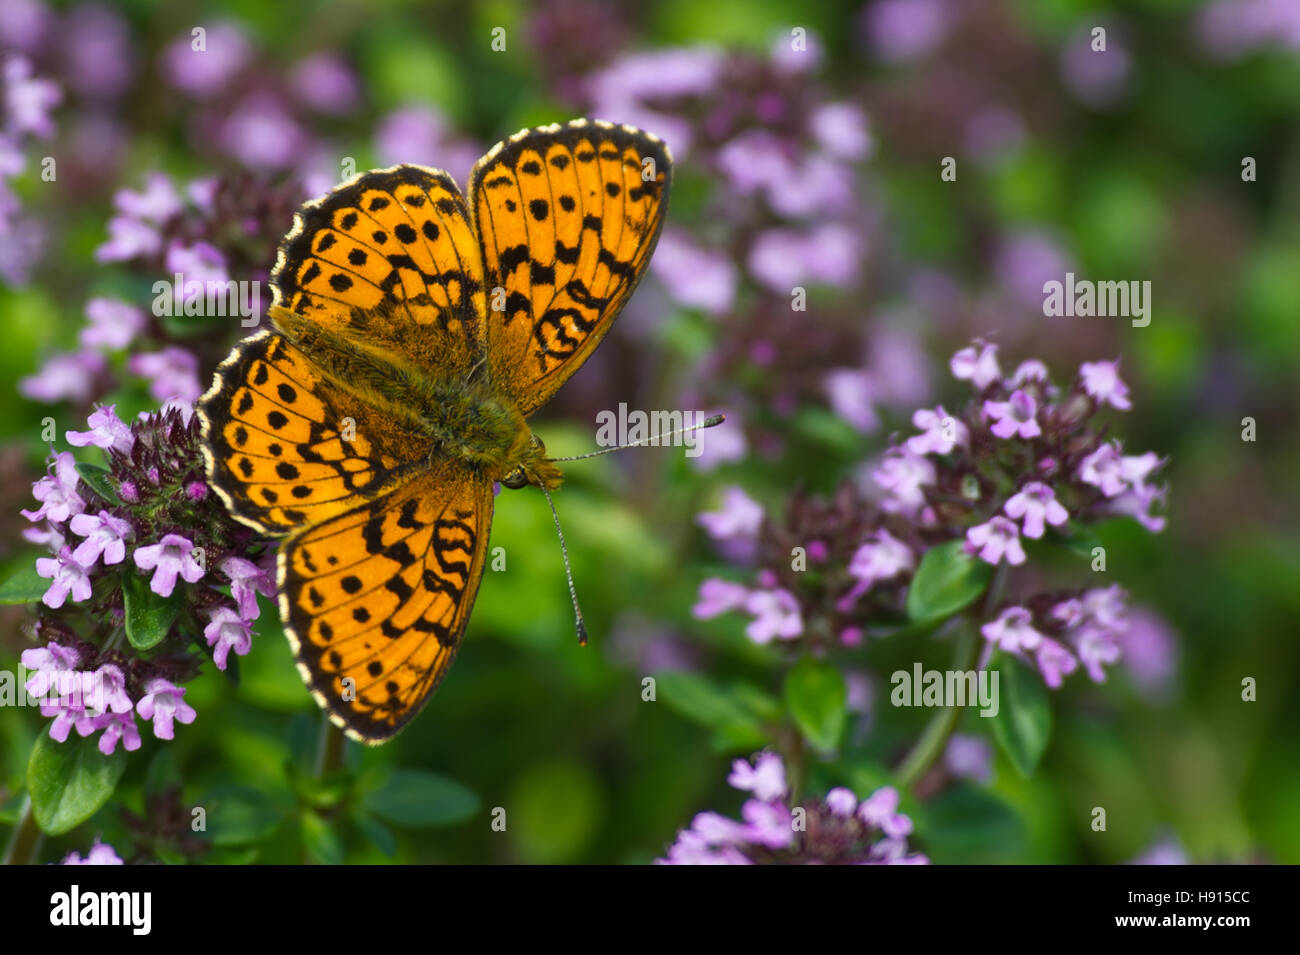 The beautiful Lesser Marbled Fritillary Butterfly (Brenthis ino) on flowering Lemon thyme (Thymus citriodorus ). Stock Photo